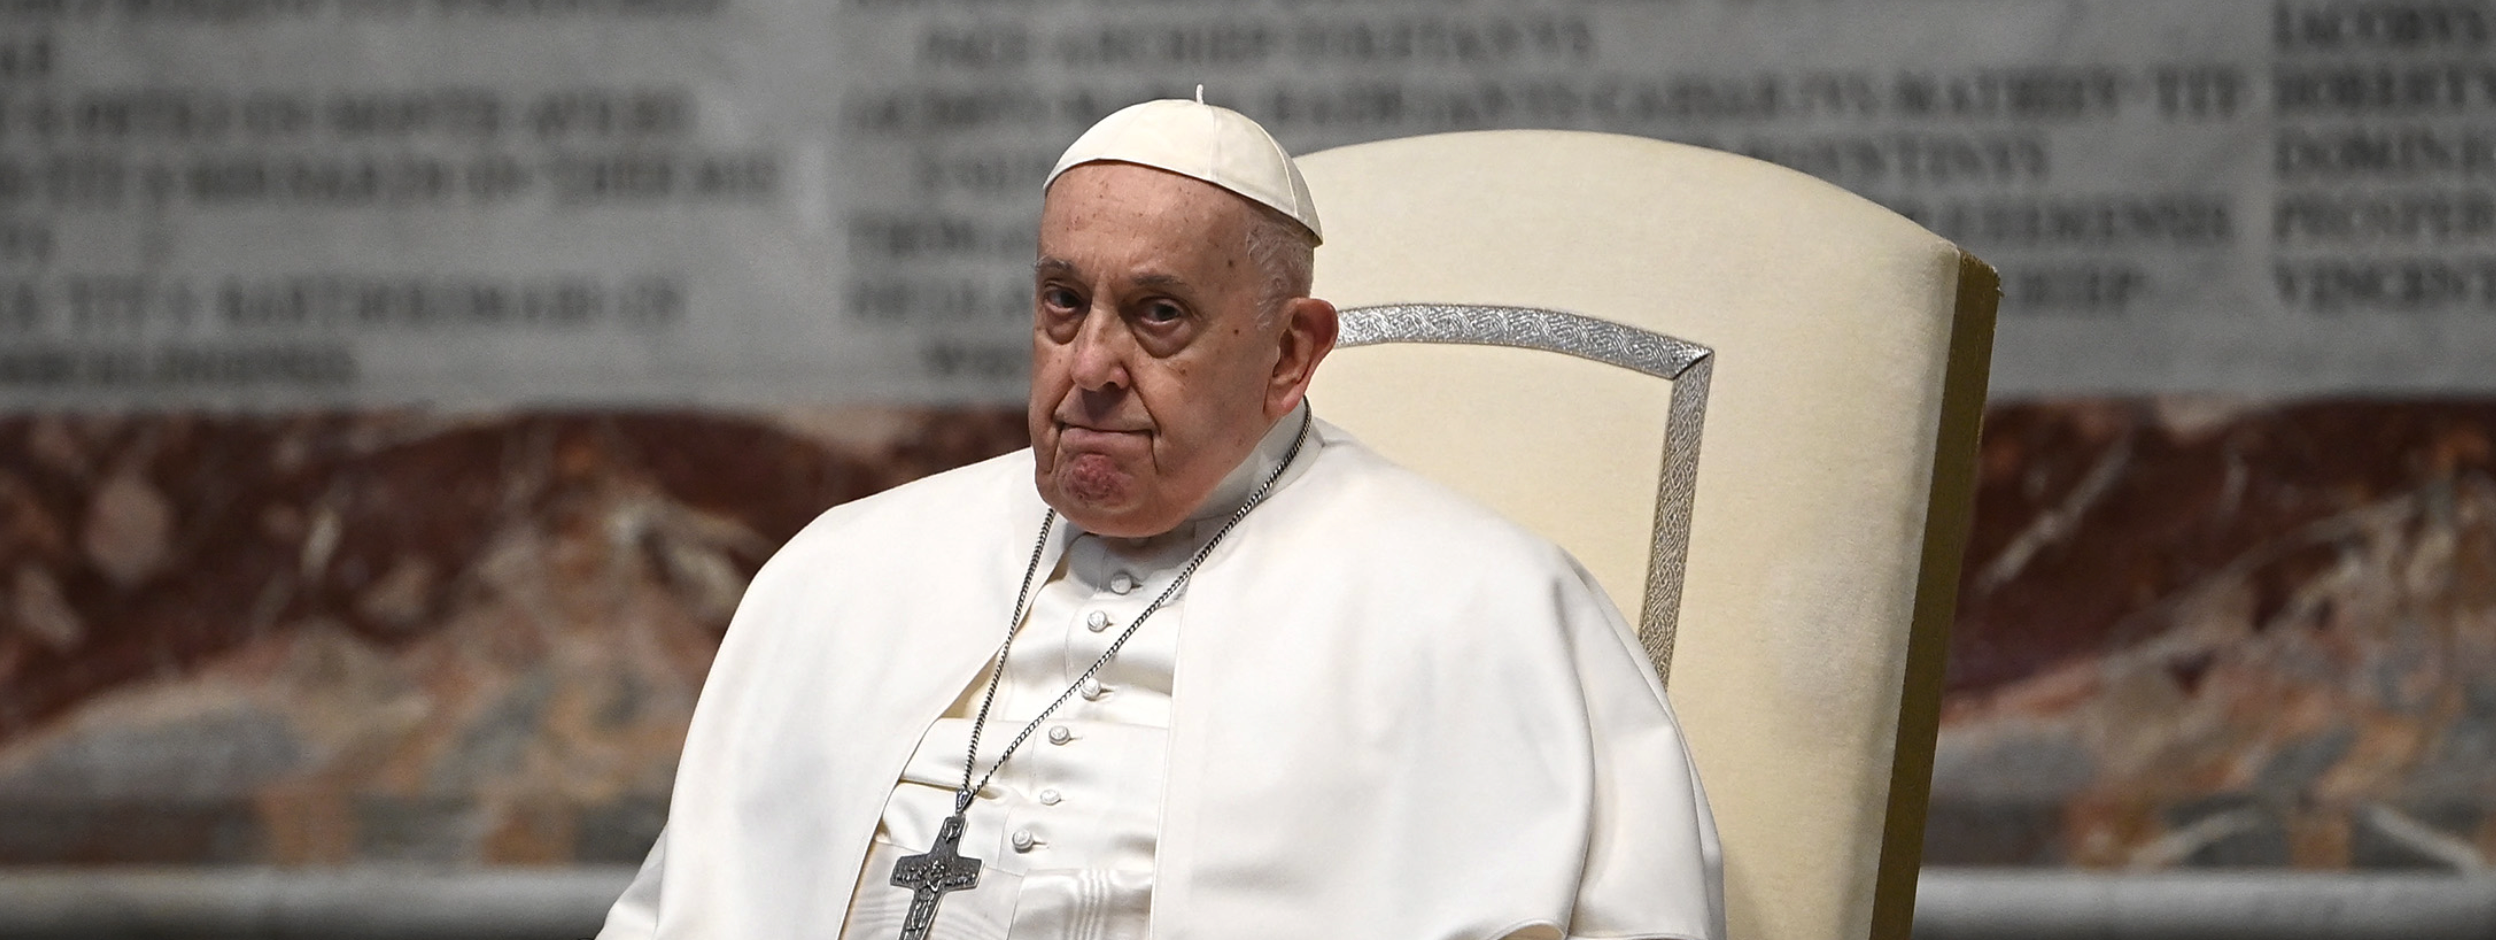 Pope Francis must apologize for calling upon Ukraine to surrender